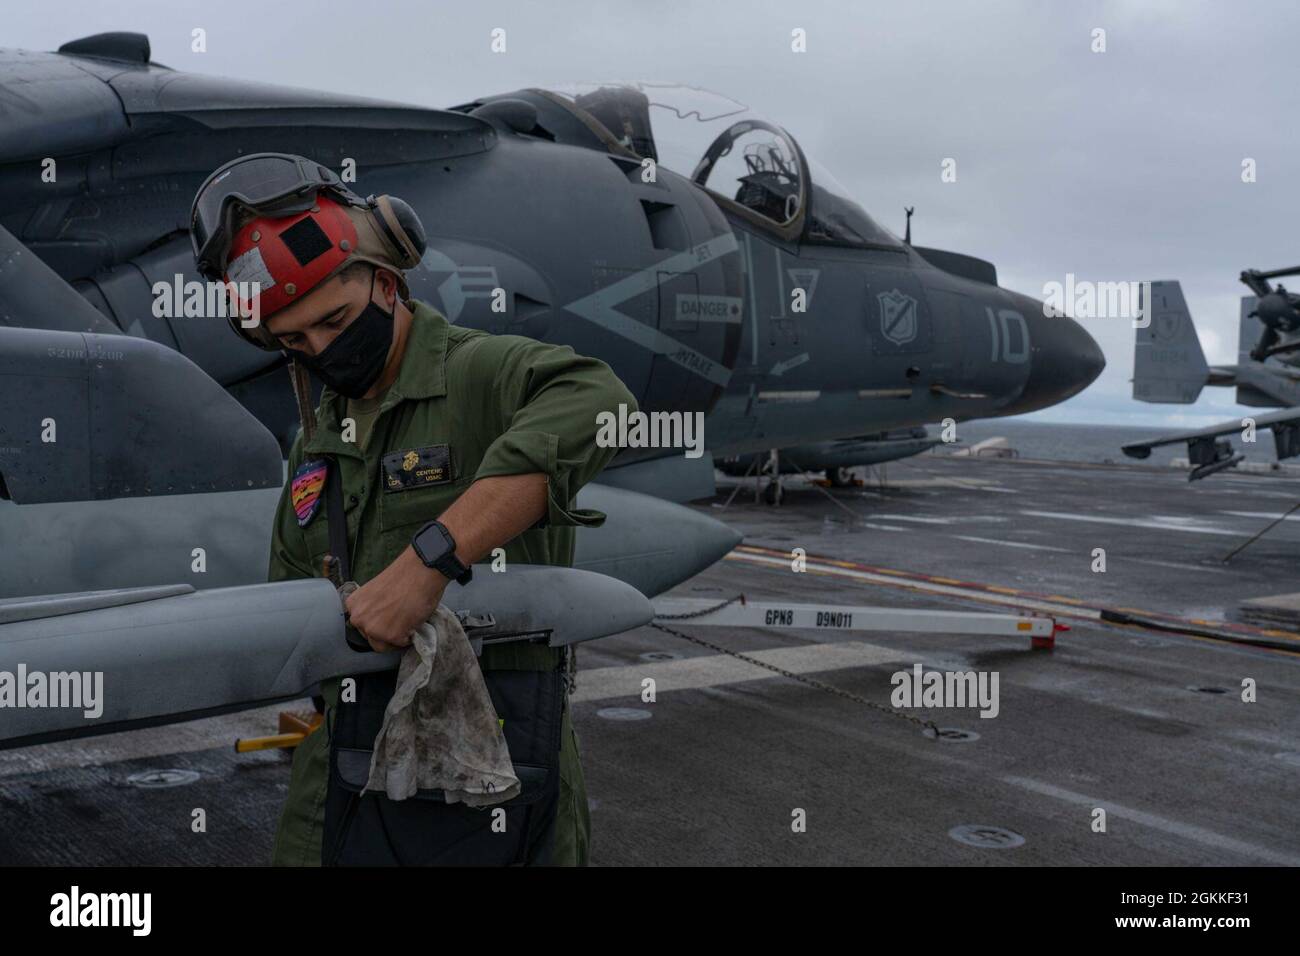 PACIFIC OCEAN (May 15, 2021) U.S. Marine Corps Lance Cpl. Angel Centeno, an aviation ordnanceman assigned to Marine Attack Squadron (VMA) 214, 11th Marine Expeditionary Unit (MEU), from Modesto, Calif., conducts maintenance on an AV-8B Harrier on the flight deck of amphibious assault ship USS Essex (LHD 2), May 16. Sailors and Marines of the Essex Amphibious Ready Group (ARG) and the 11th MEU are underway off the coast of southern California. Stock Photo